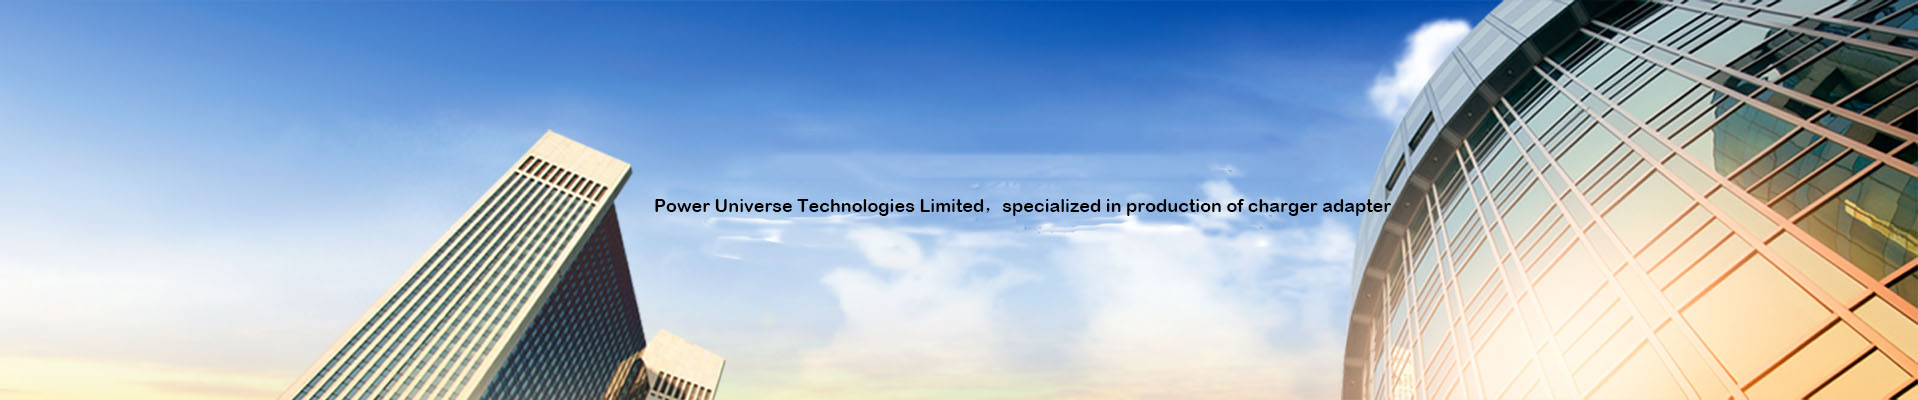 Power Universe Technologies Limited